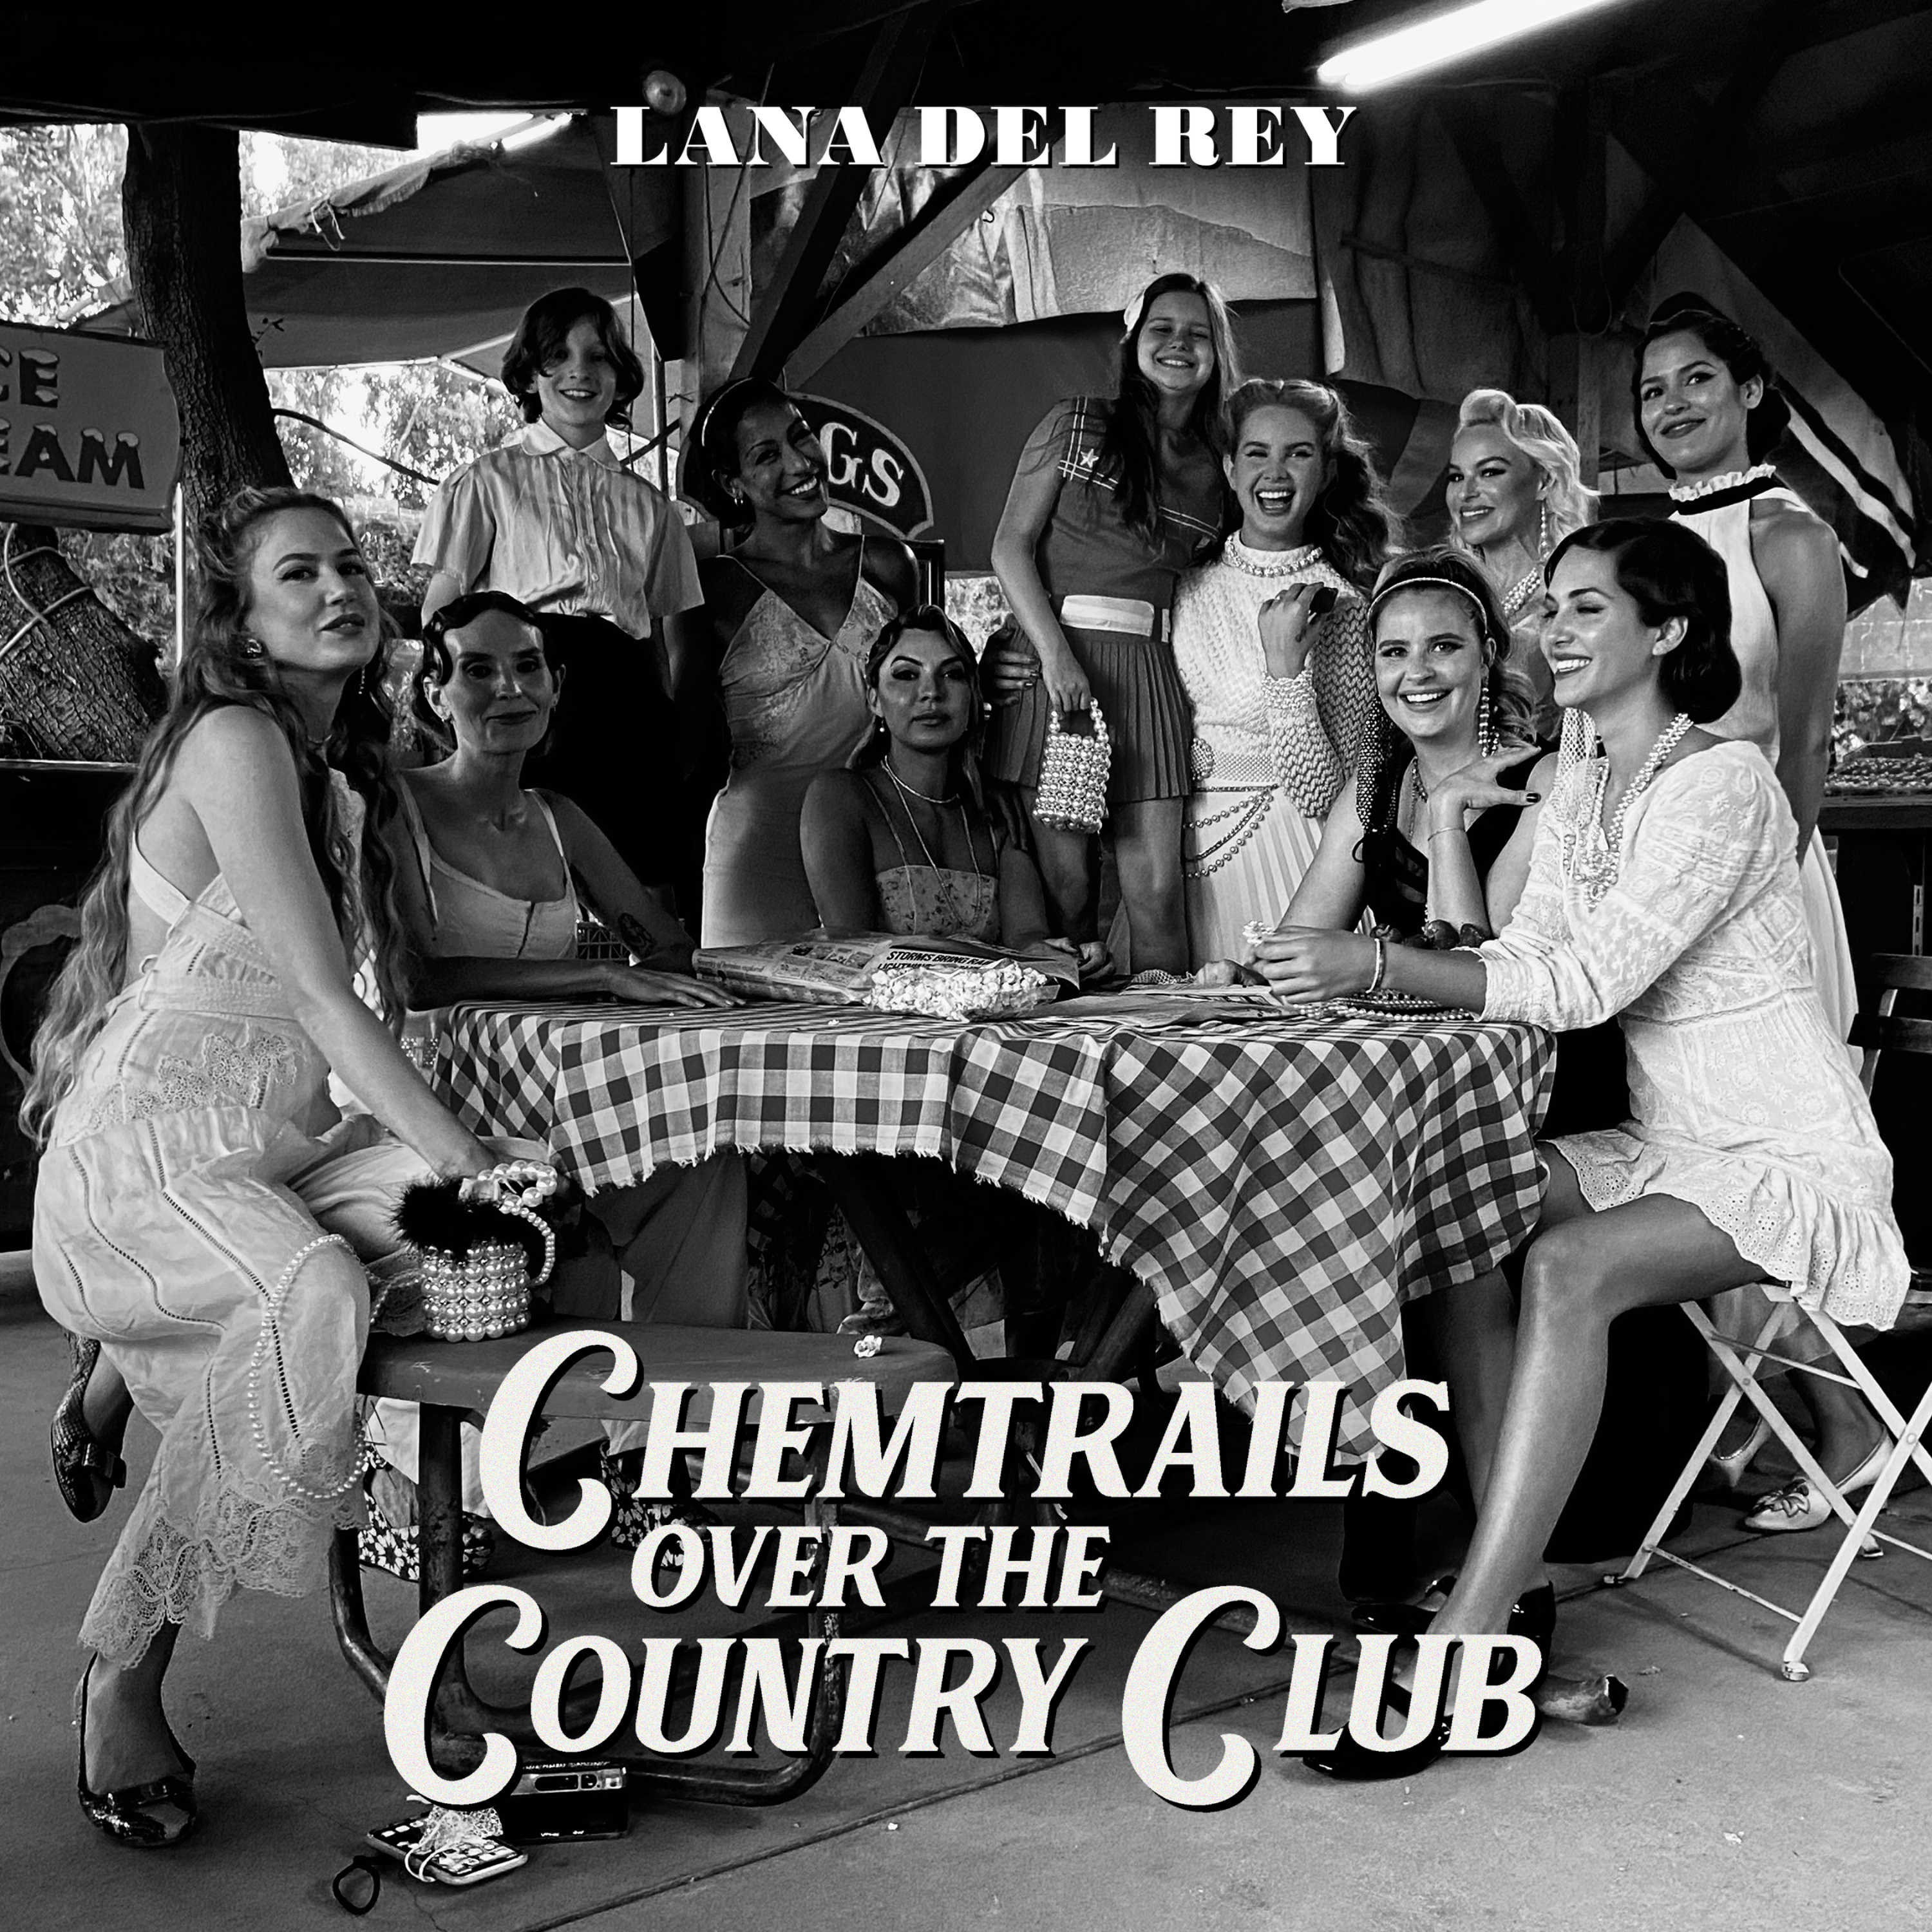 Chemtrails Over The Country Club歌词 歌手Lana Del Rey-专辑Chemtrails Over The Country Club-单曲《Chemtrails Over The Country Club》LRC歌词下载